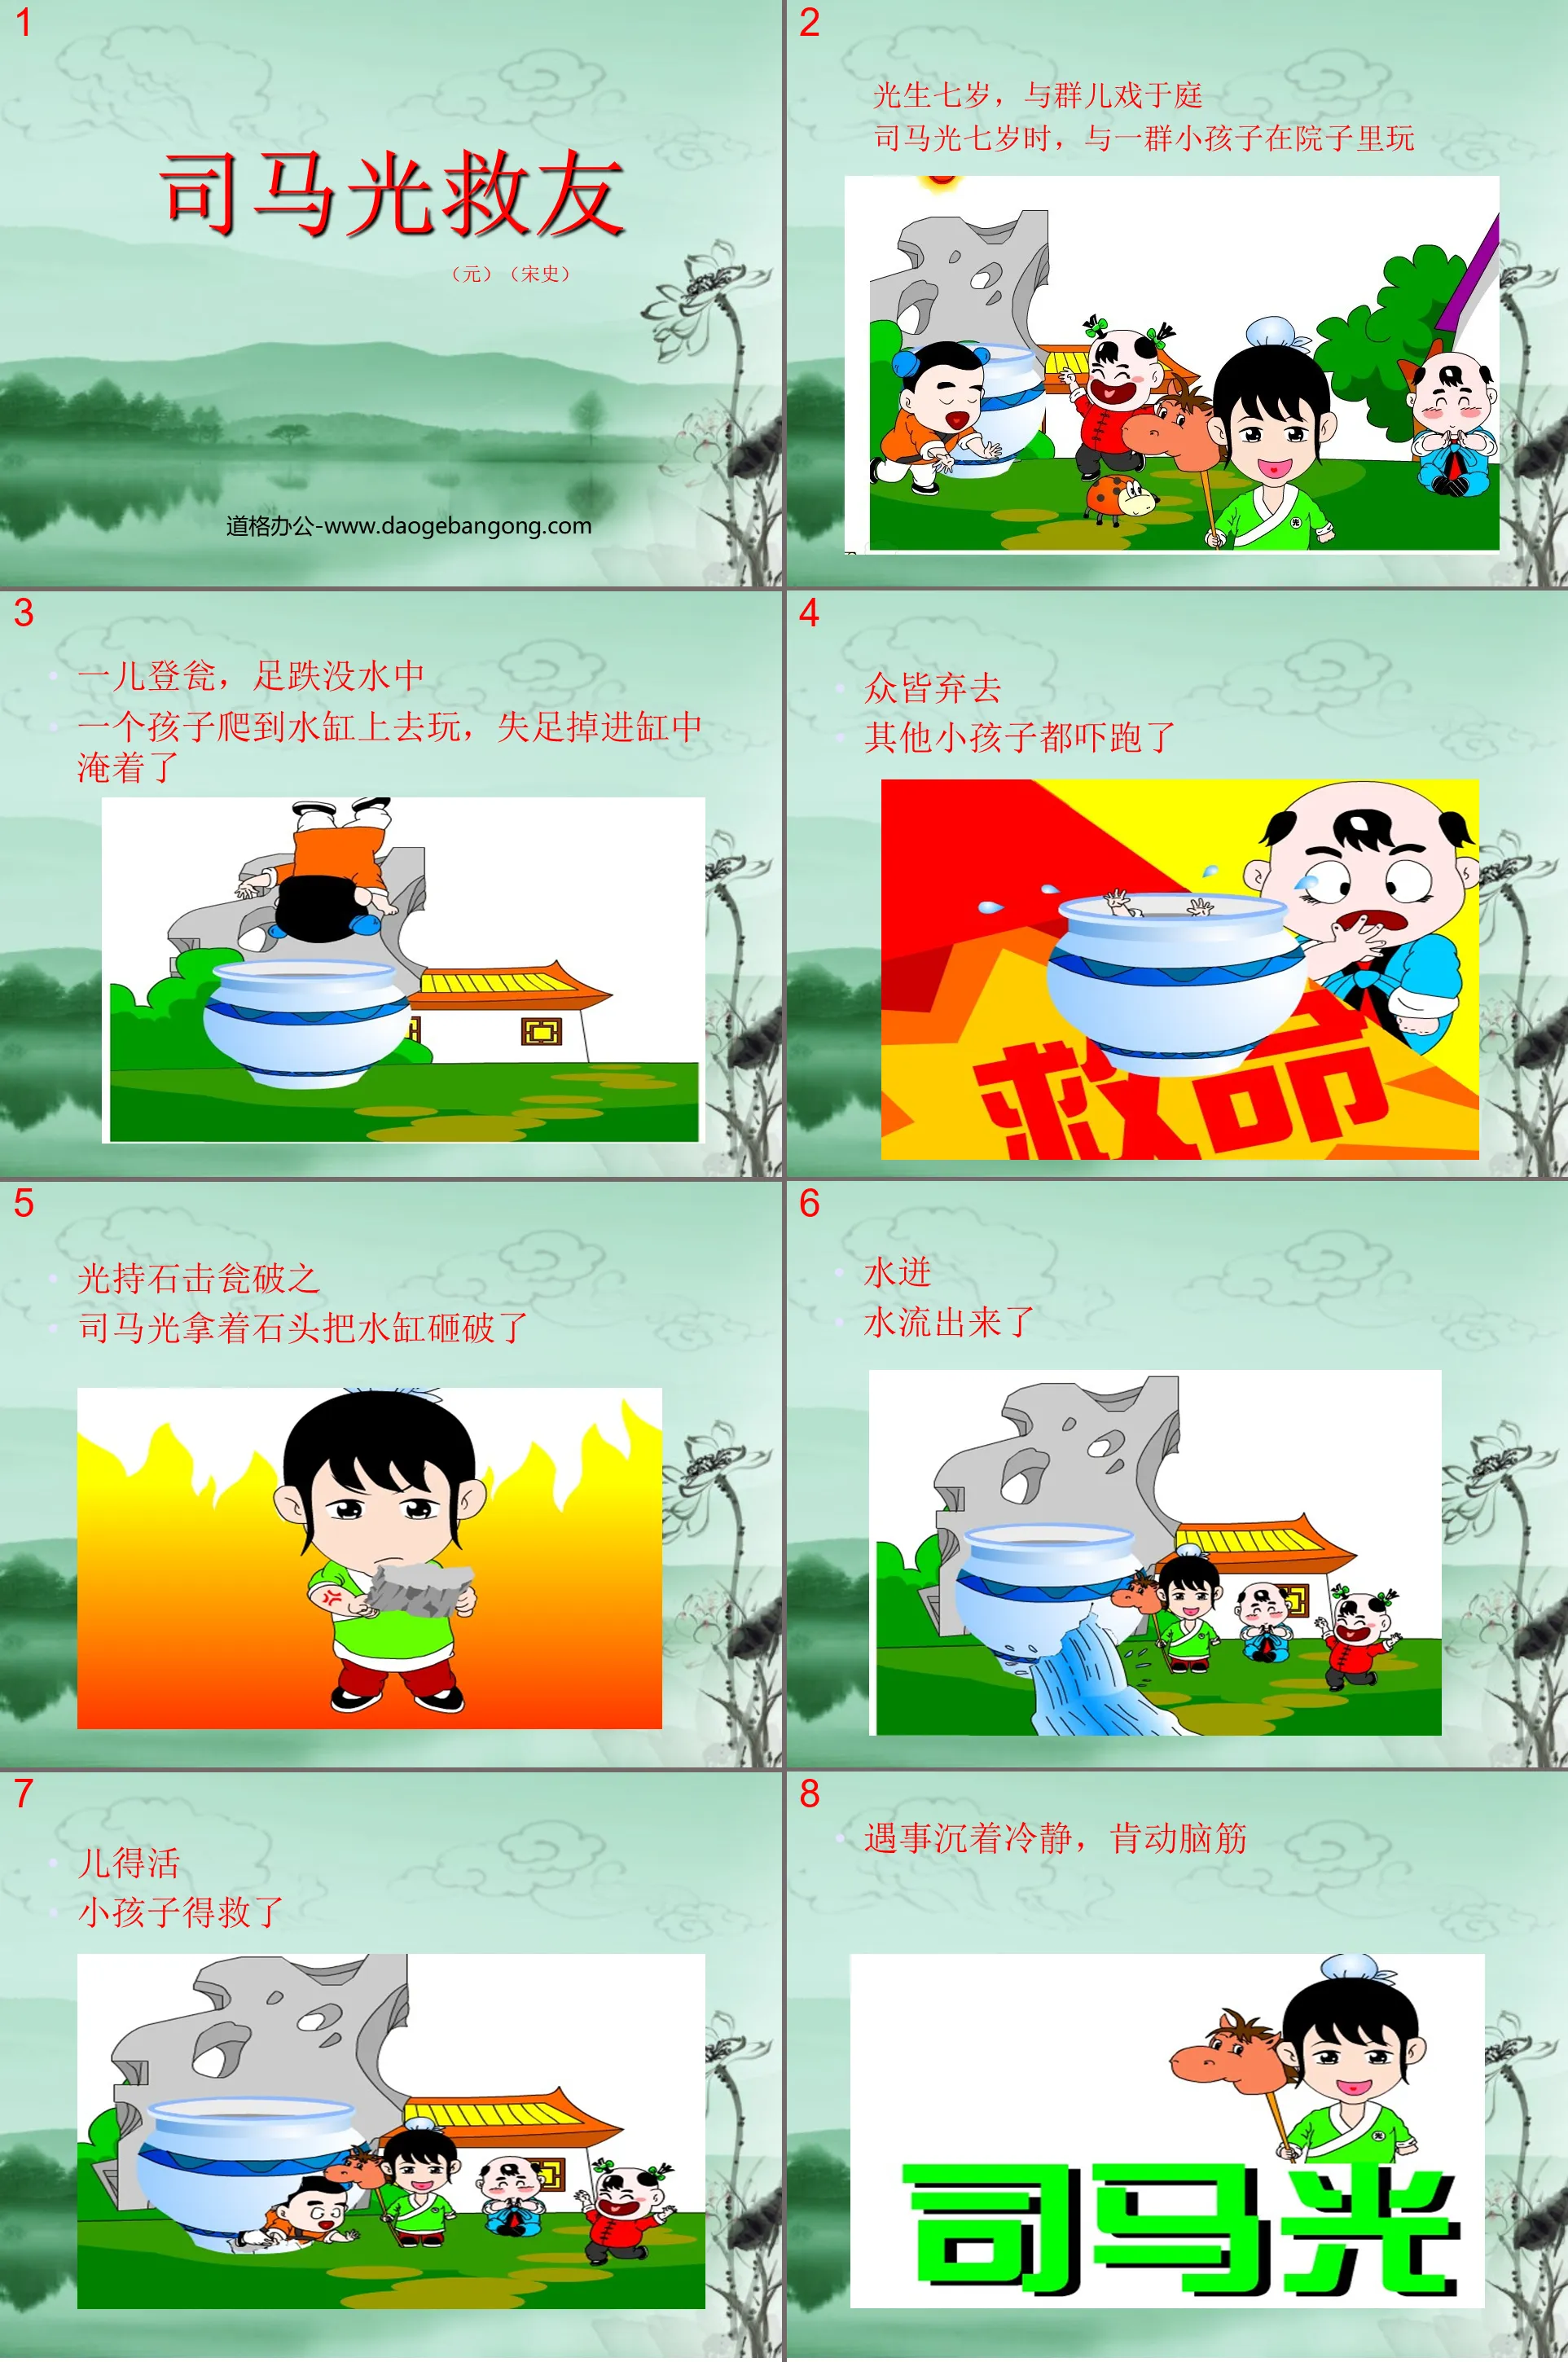 "Sima Guang Saves Friends" PPT courseware